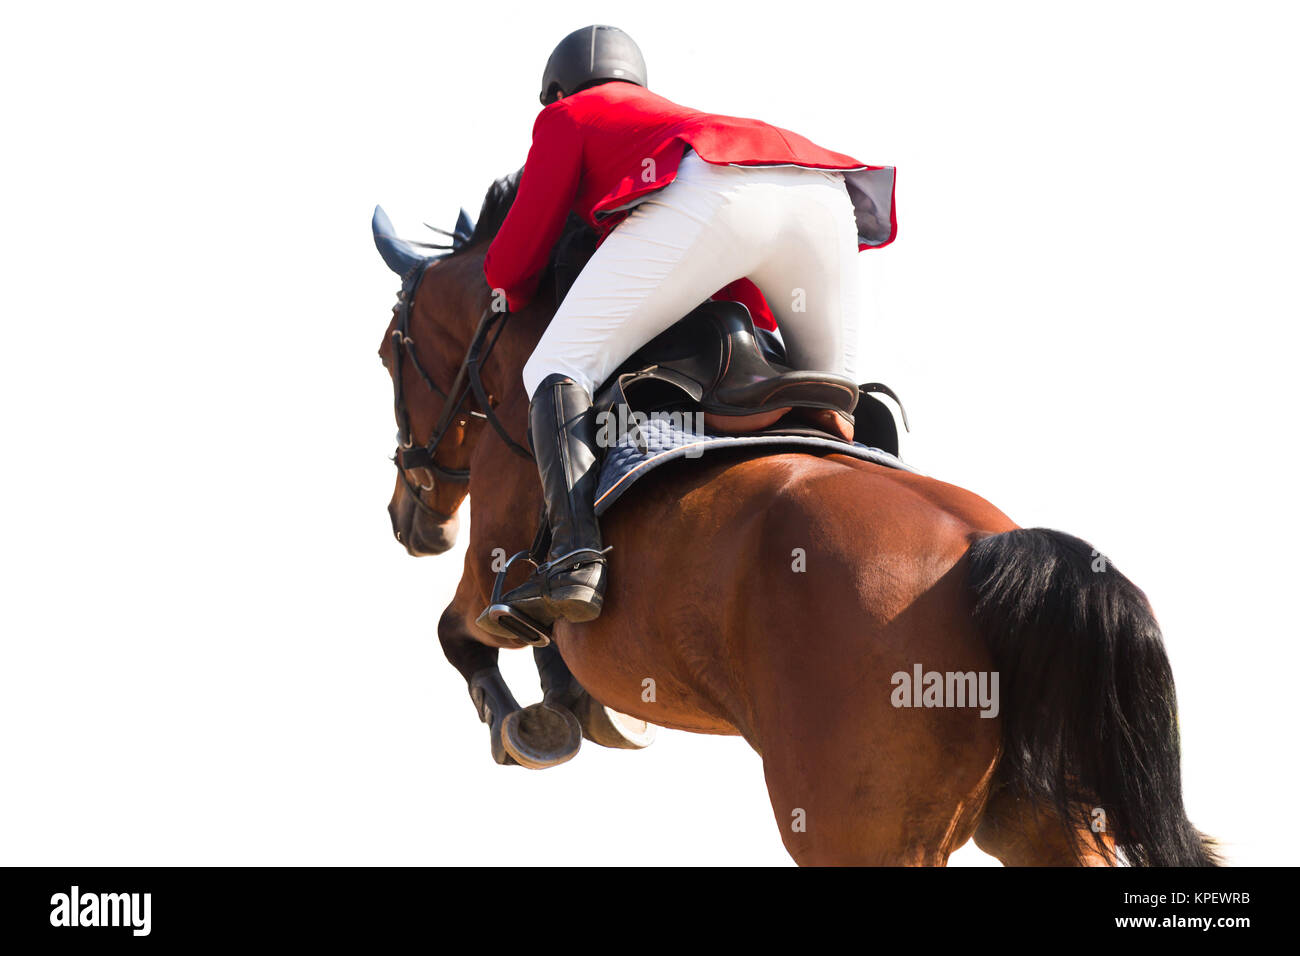 Equestrian Sports, Horse Jumping Event, Isolated on White Background Stock Photo